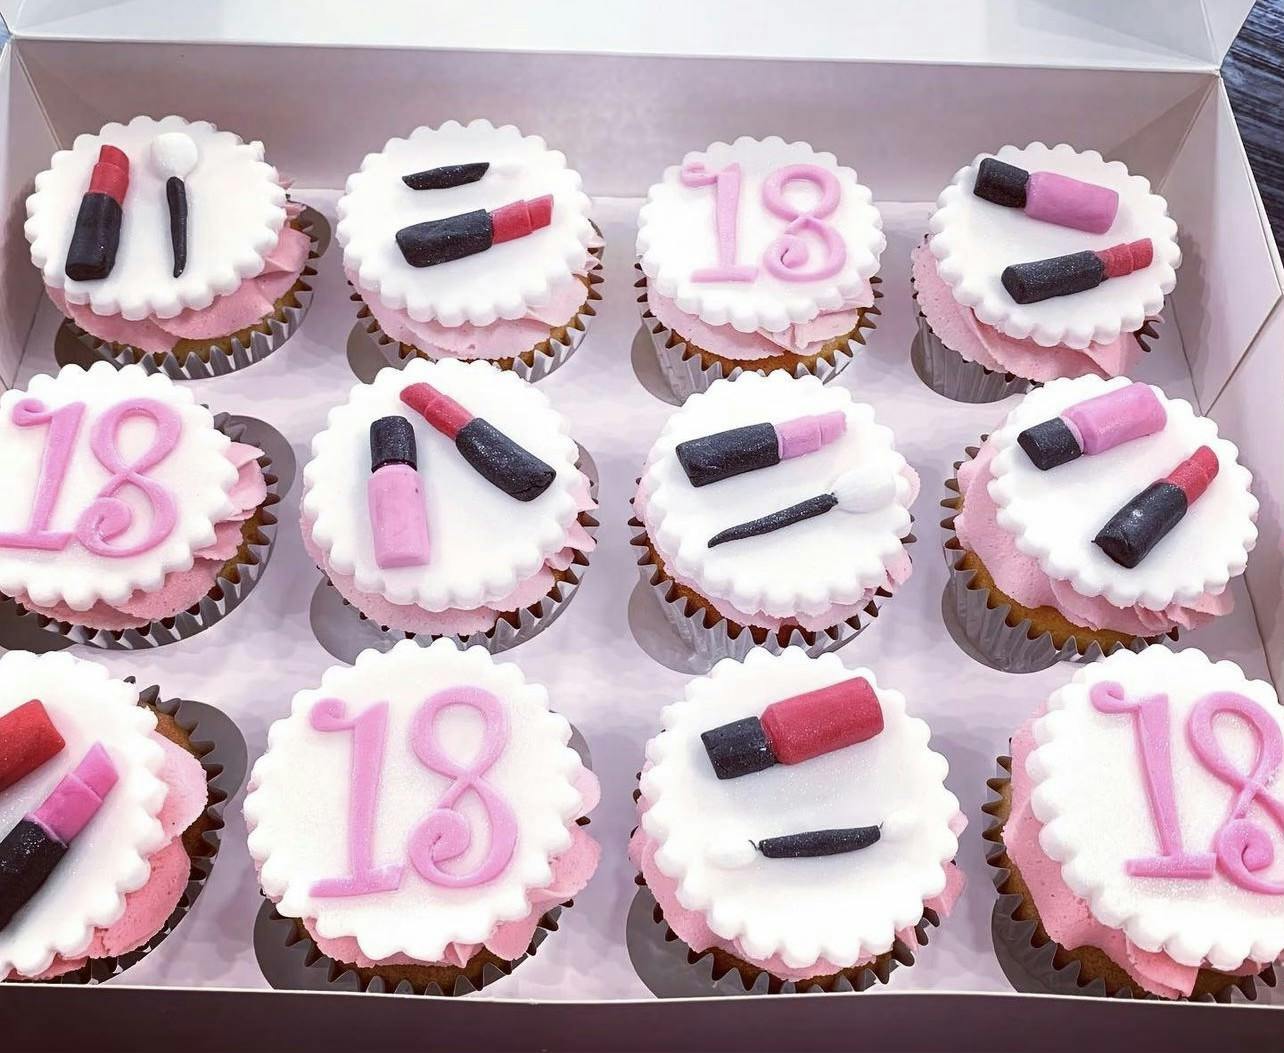 White and pink cupcakes for an eighteenth birthday with fondant lipstick and beauty products on top